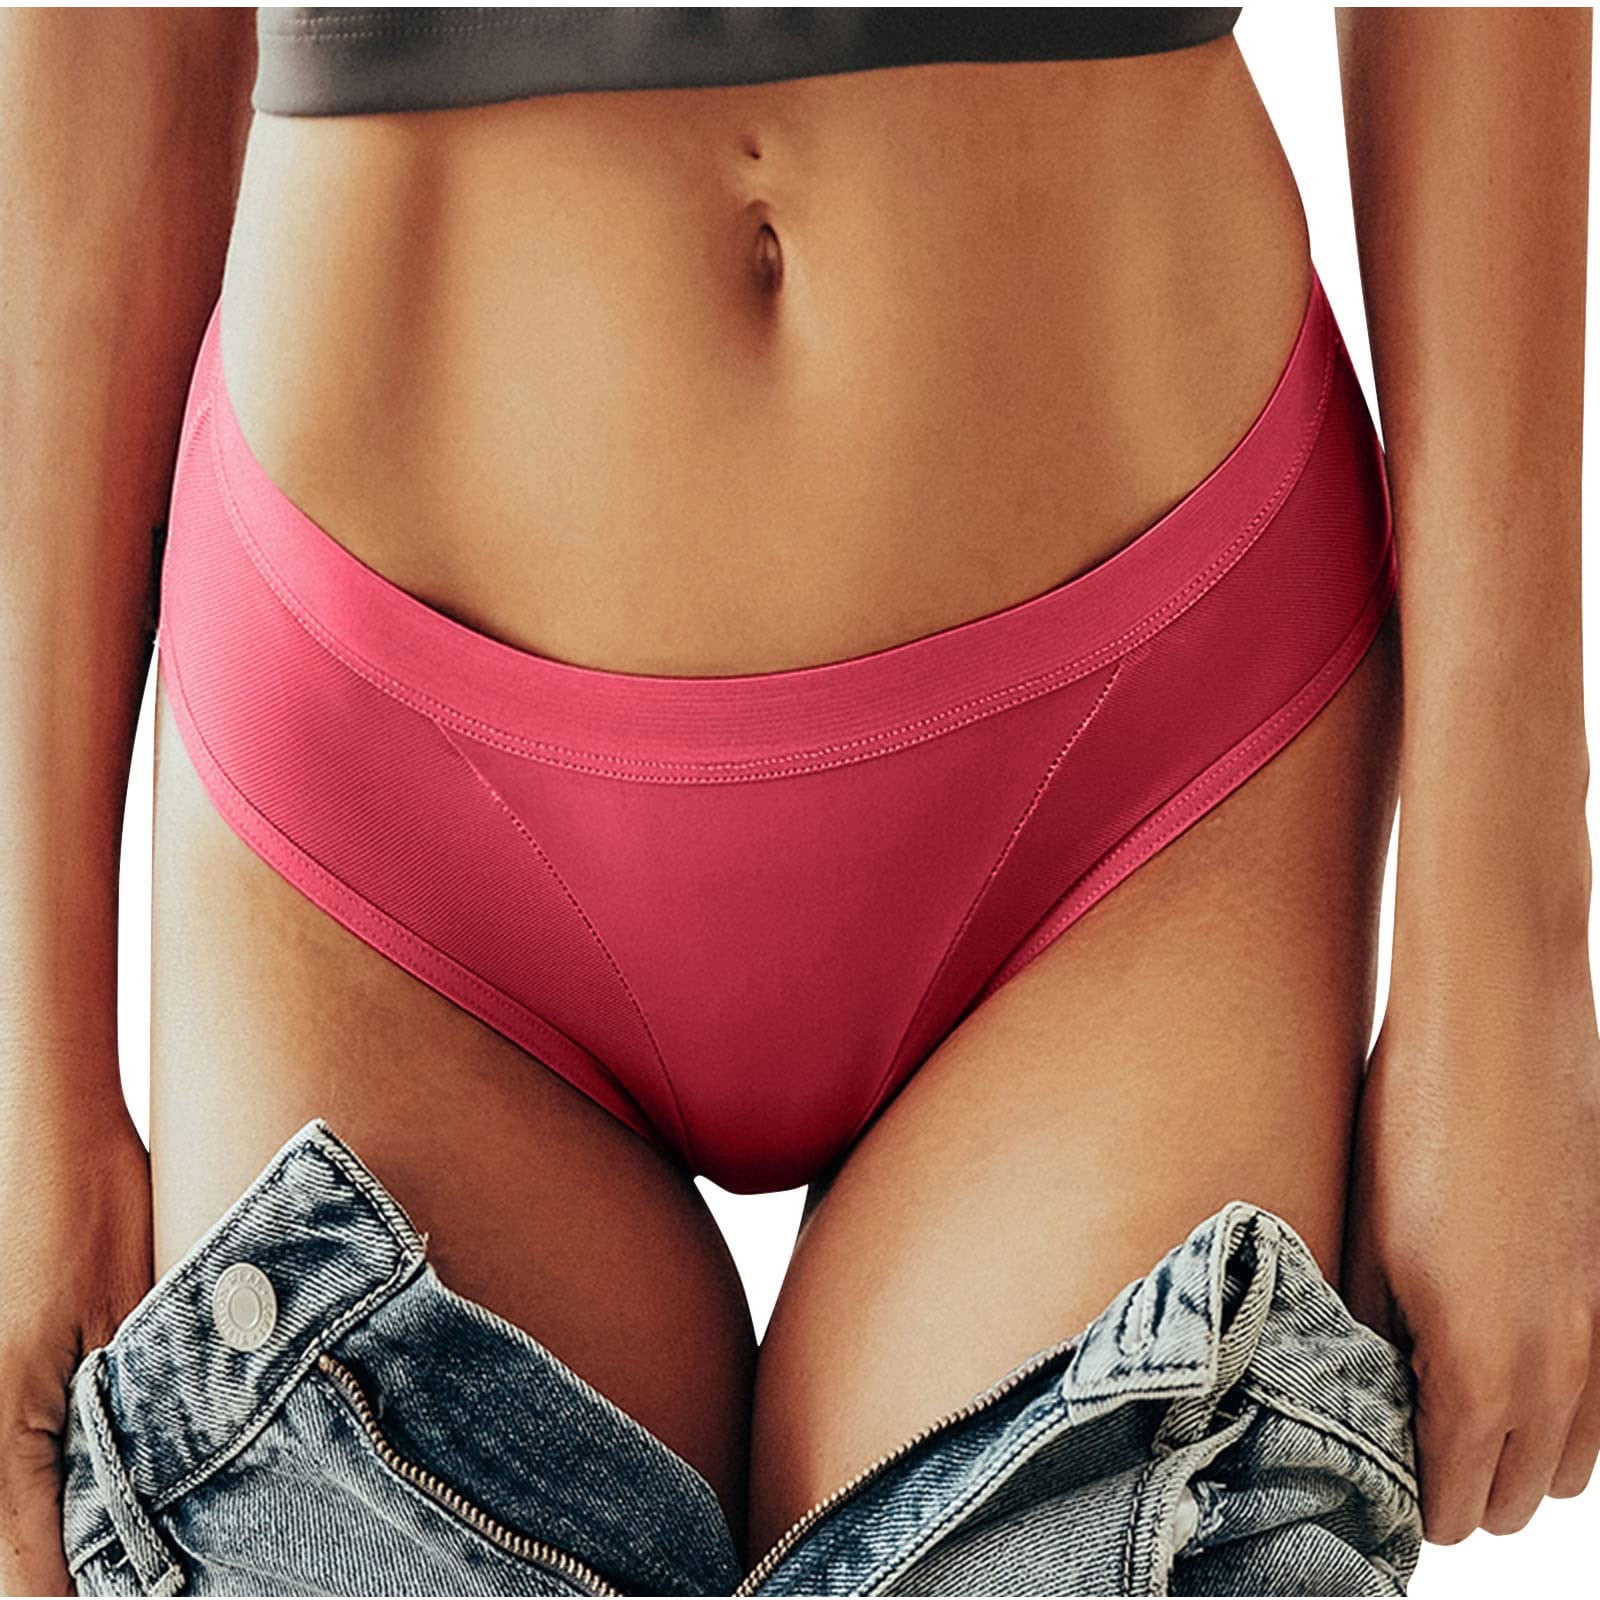 Kayannuo Lingerie For Women Back to School Clearance Women's Solid  Underwear Cotton Stretch Sexy Panties Lingerie Women Briefs